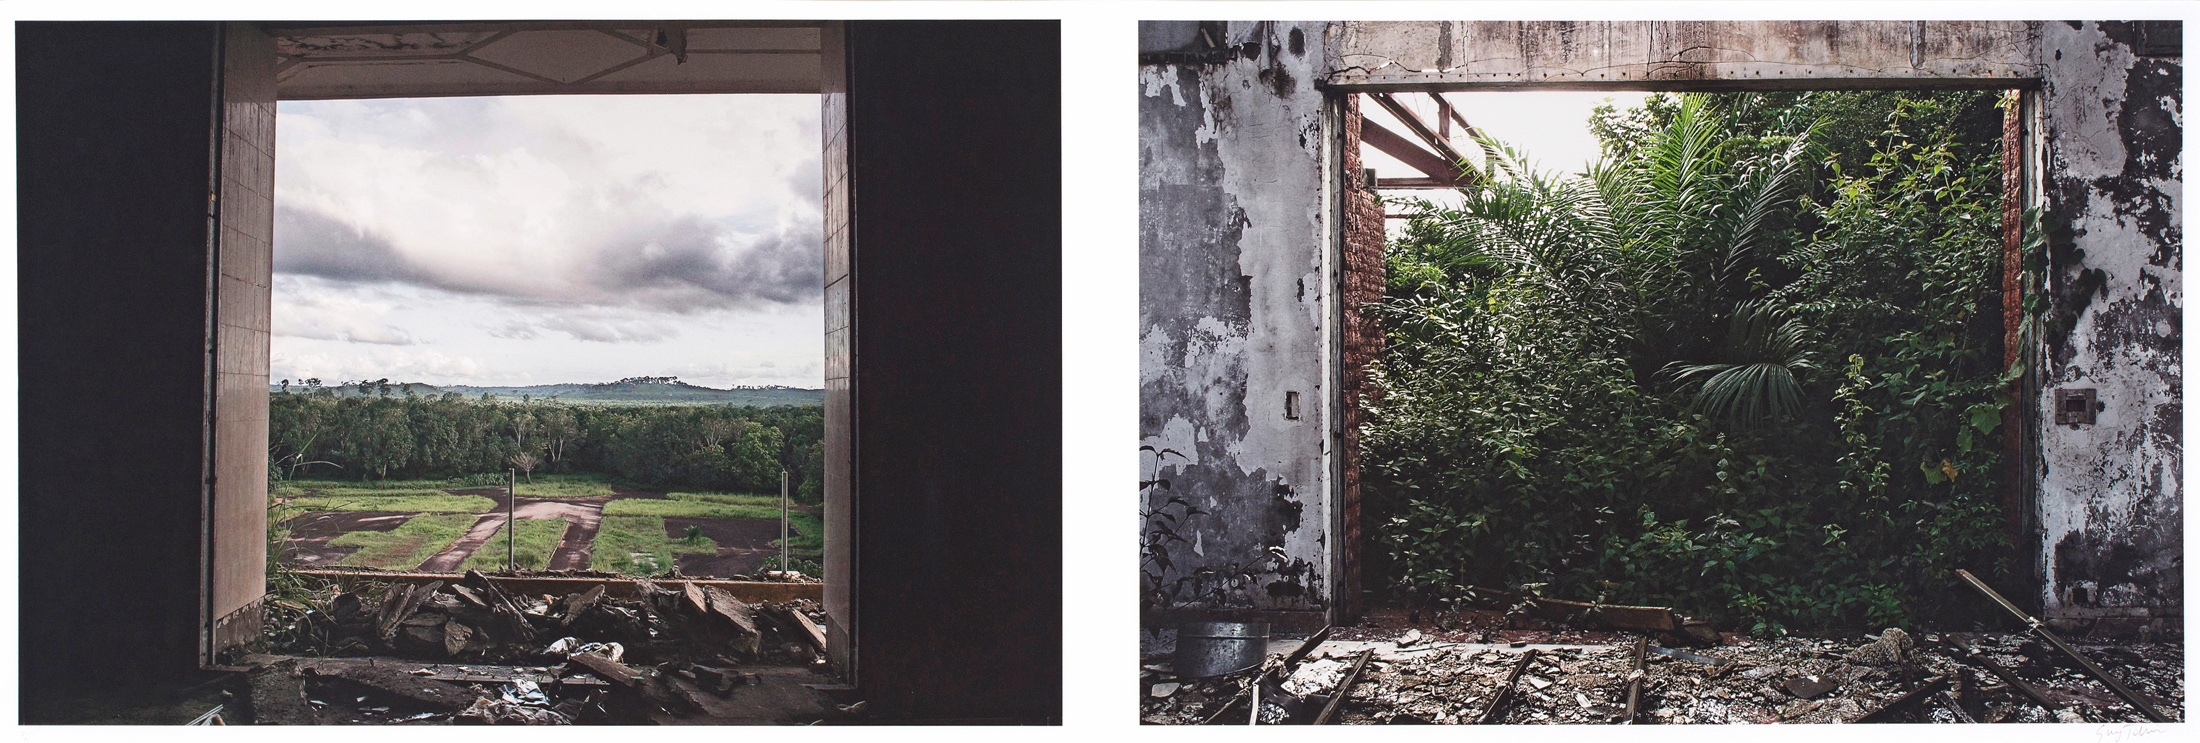 Guy Tillim; Leopold and Mobutu #8: the remains of Mobutu Sese Seko's palace at Gbadolite, diptych